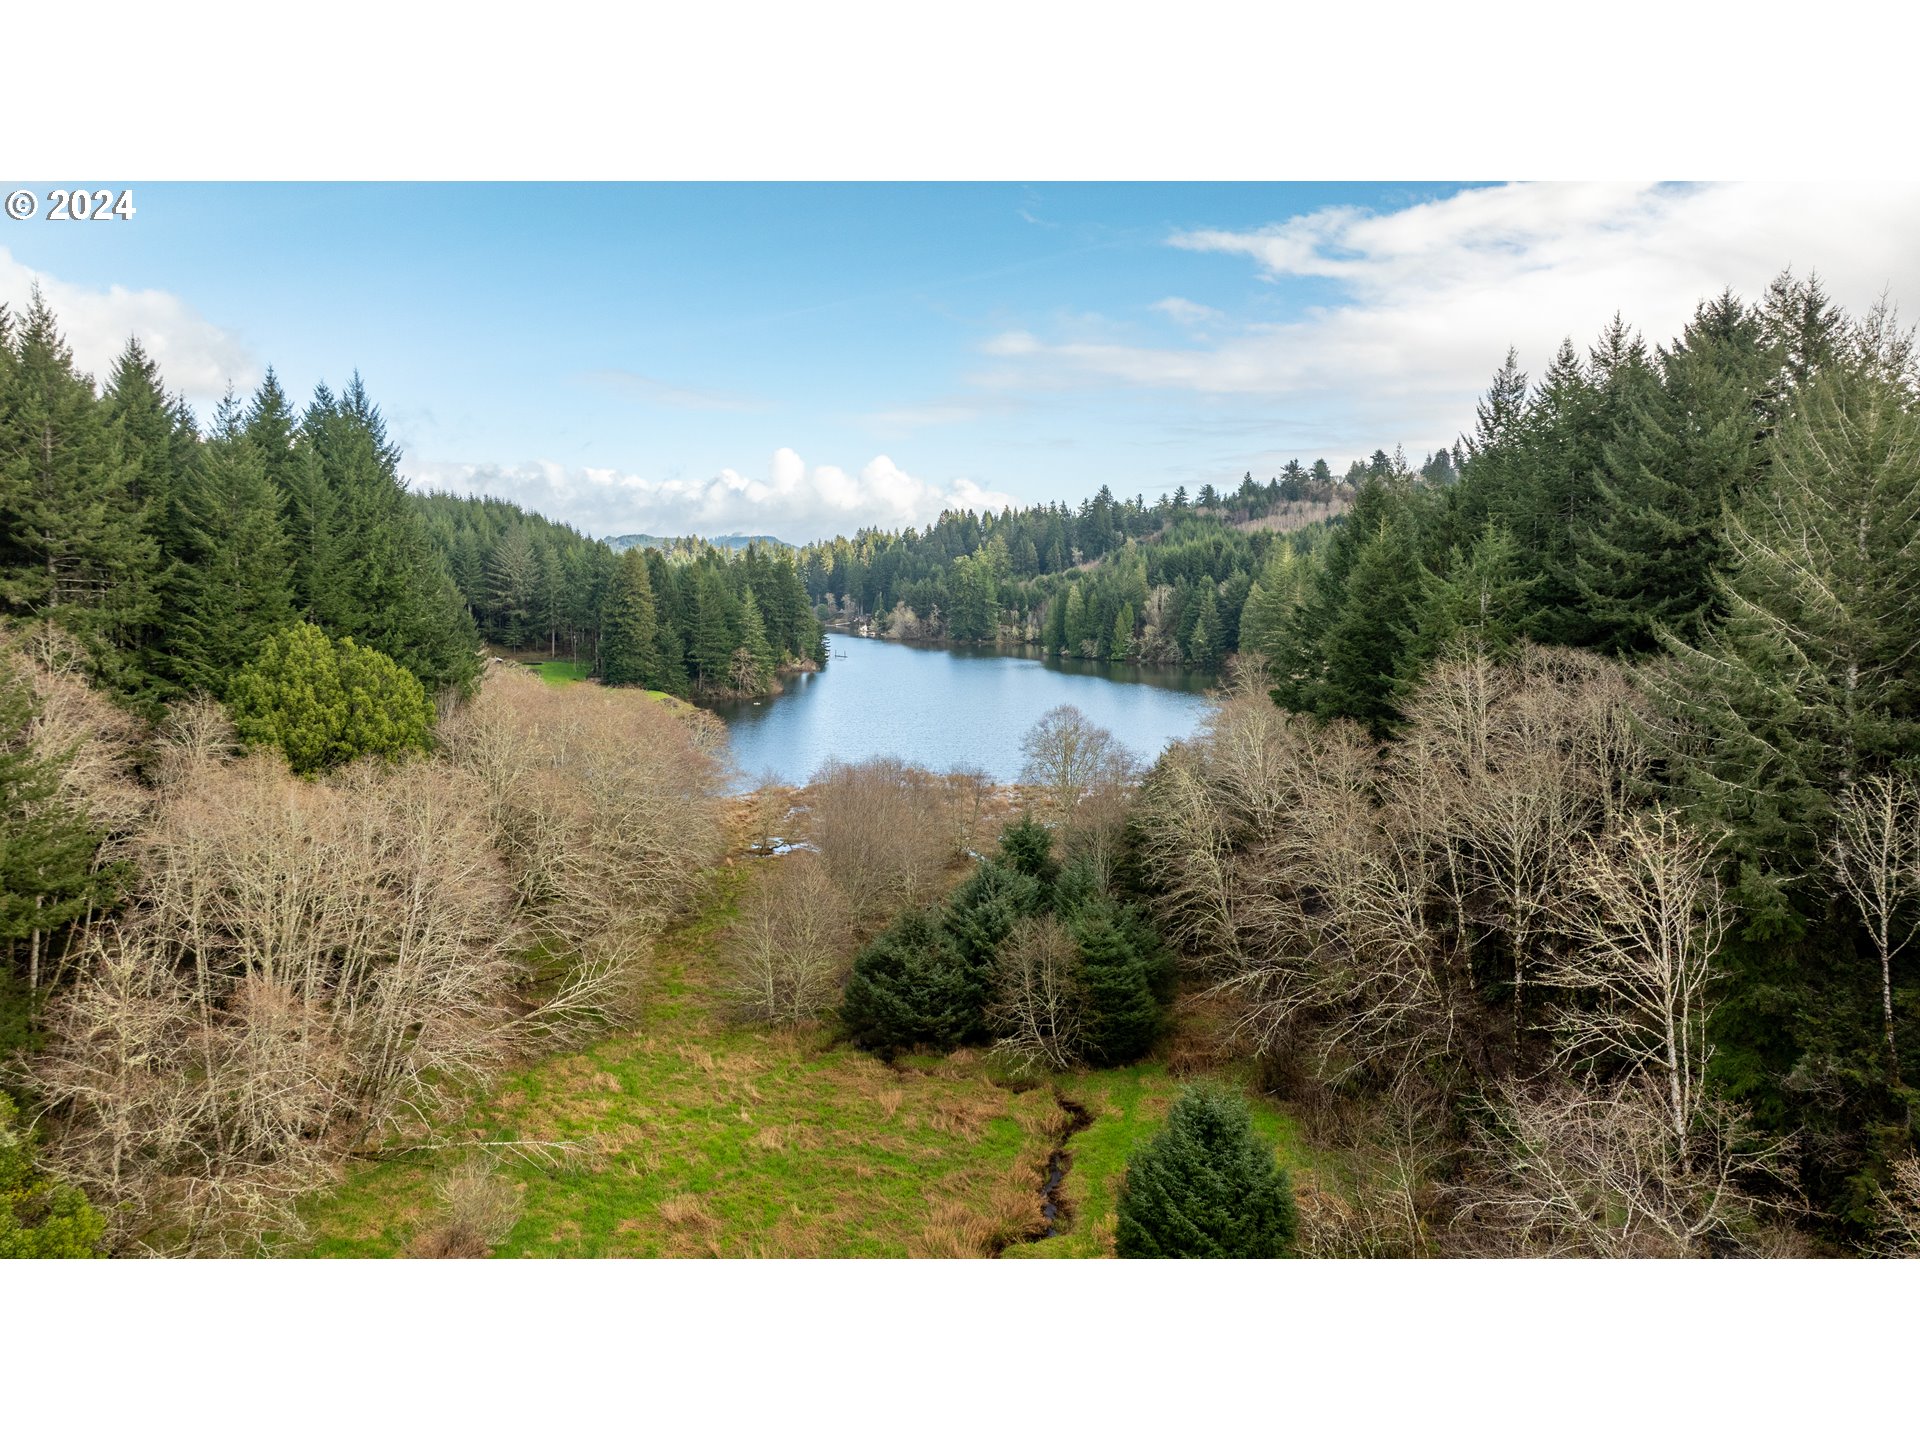 0 HILLTOP DR 1404, Lakeside, OR 97449